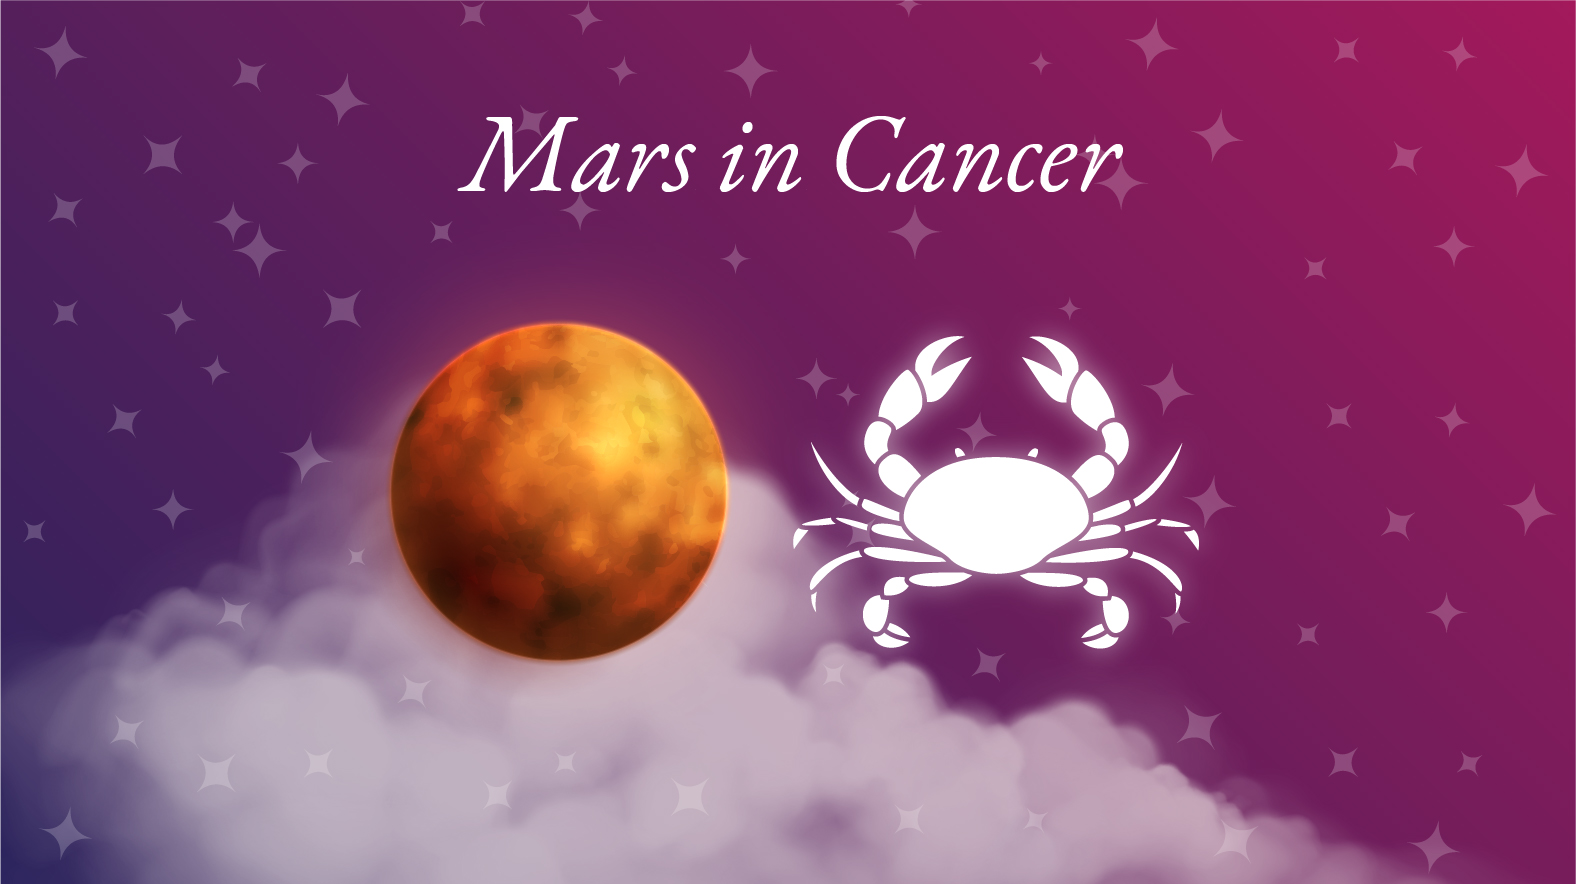 Mars in Cancer Meaning